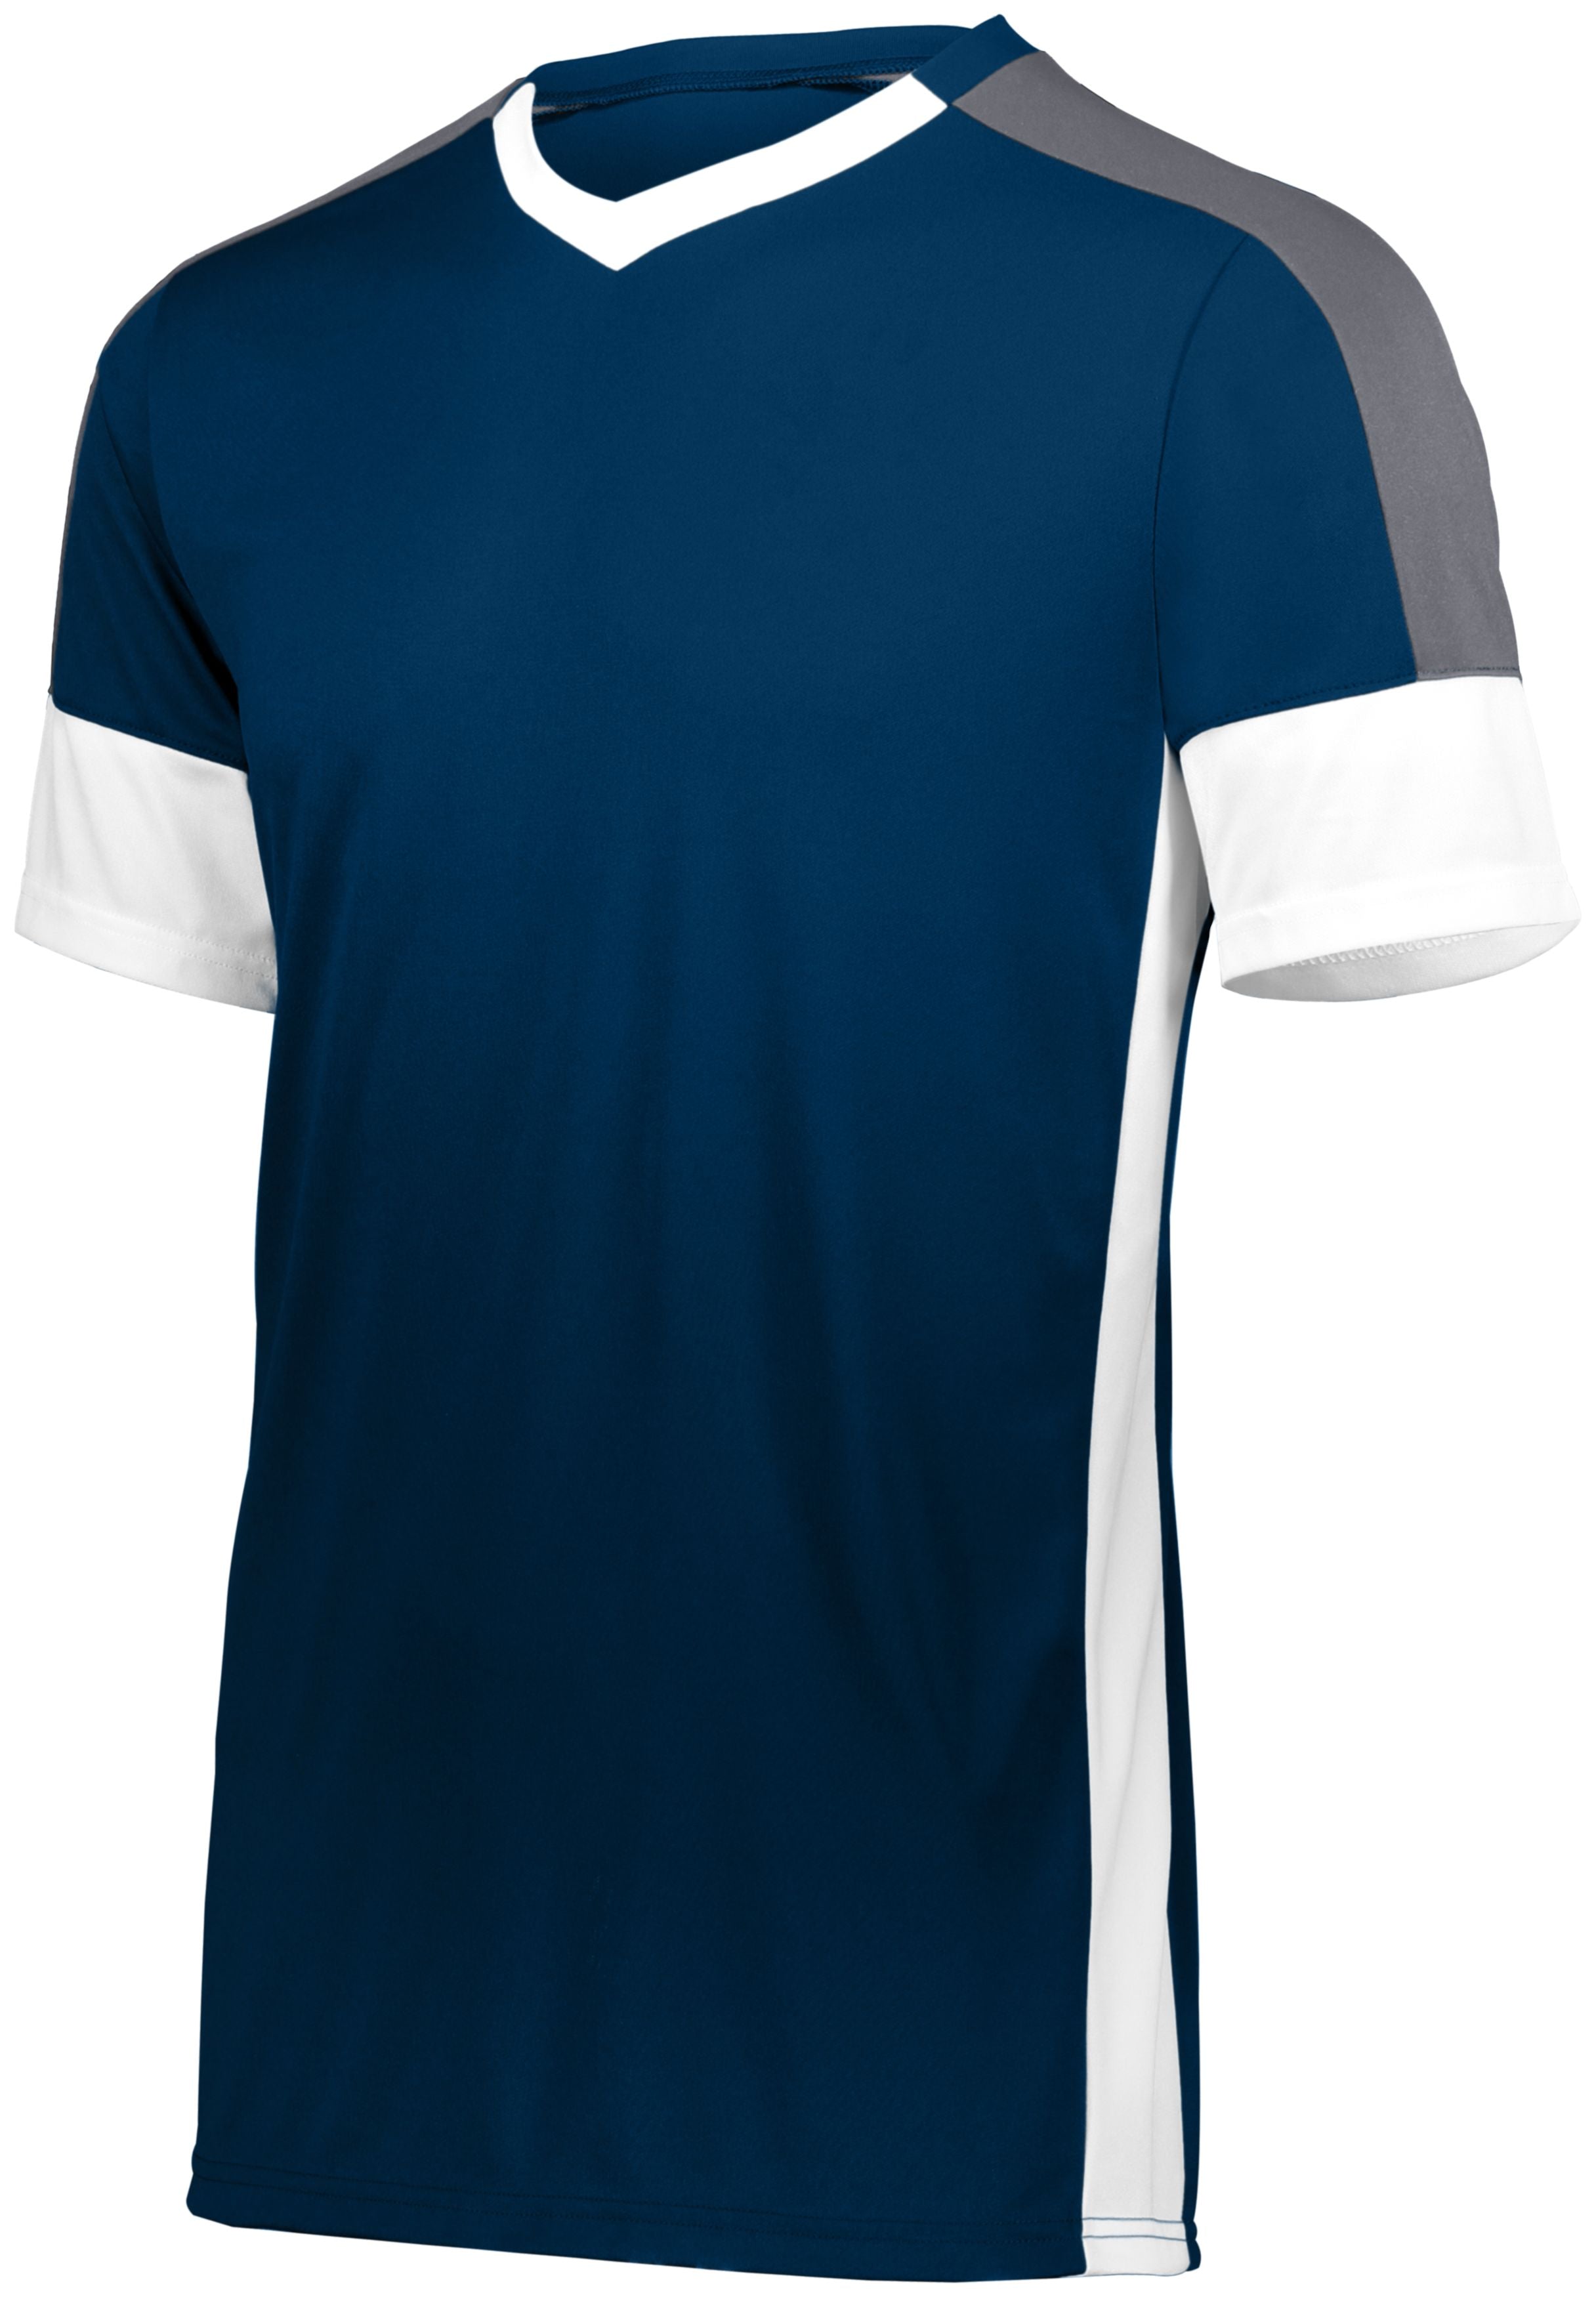 High 5 Youth Wembley Soccer Jersey in Navy/White/Graphite  -Part of the Youth, Youth-Jersey, High5-Products, Soccer, Shirts, All-Sports-1 product lines at KanaleyCreations.com